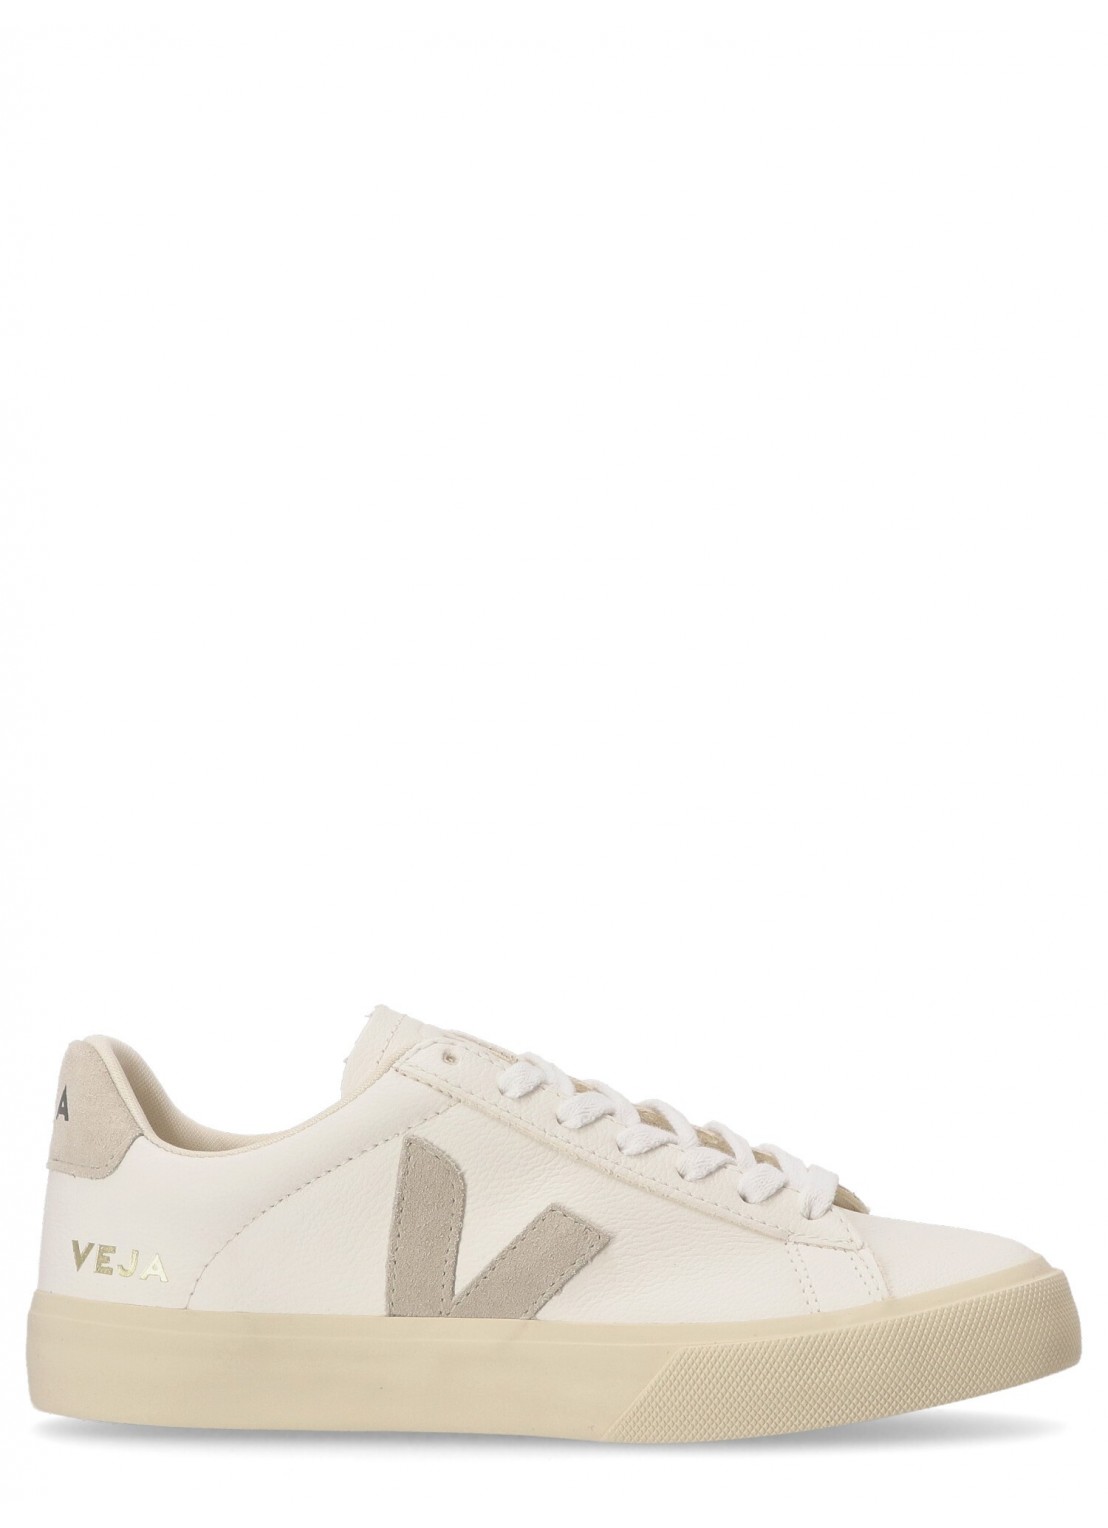 Sneaker veja sneaker woman campo cp0502429 extra white natural suede talla blanco
 